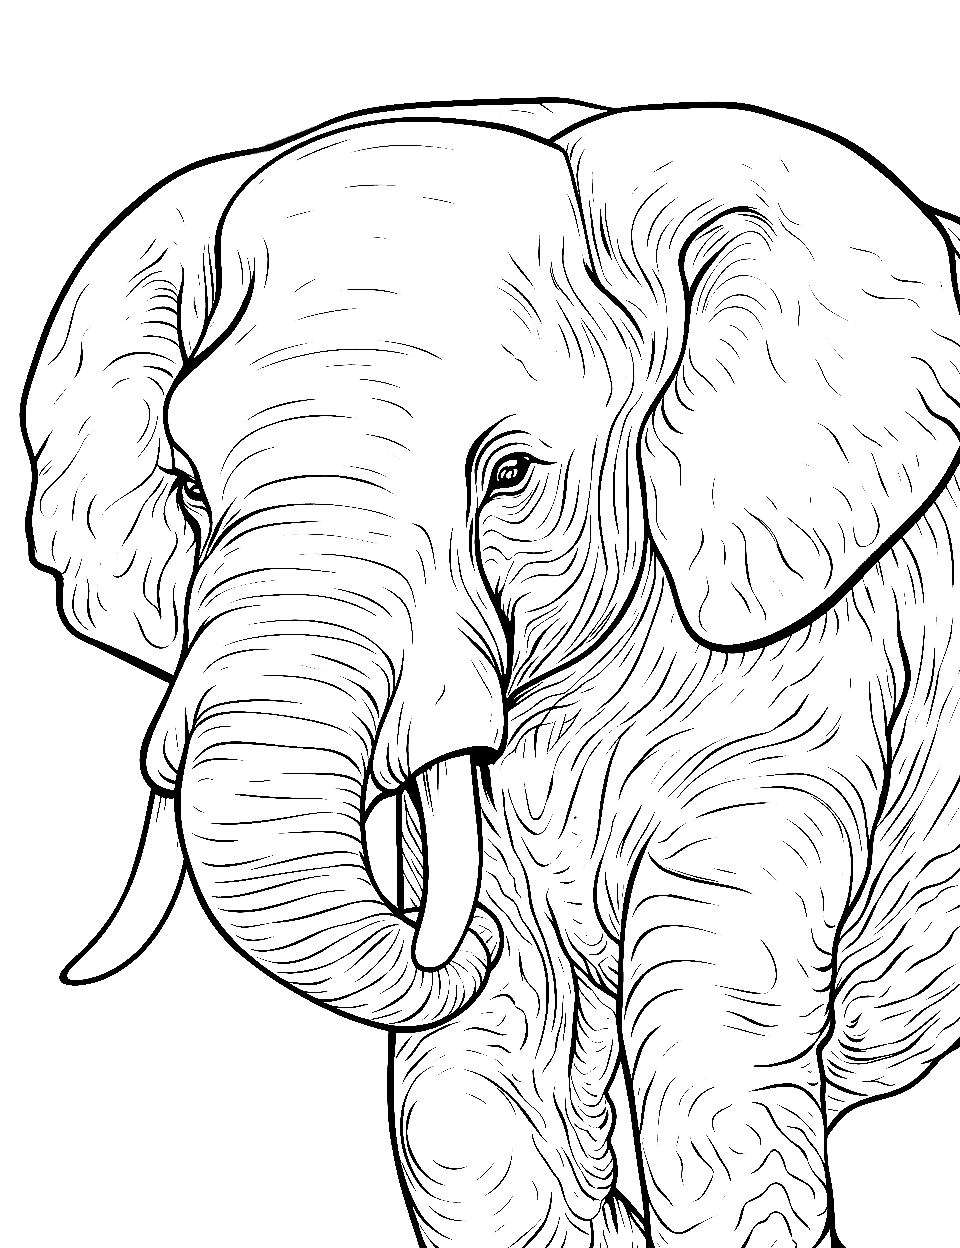 Detailed Elephant Texture Coloring Page - A close-up view showcasing the textured skin of an elephant.